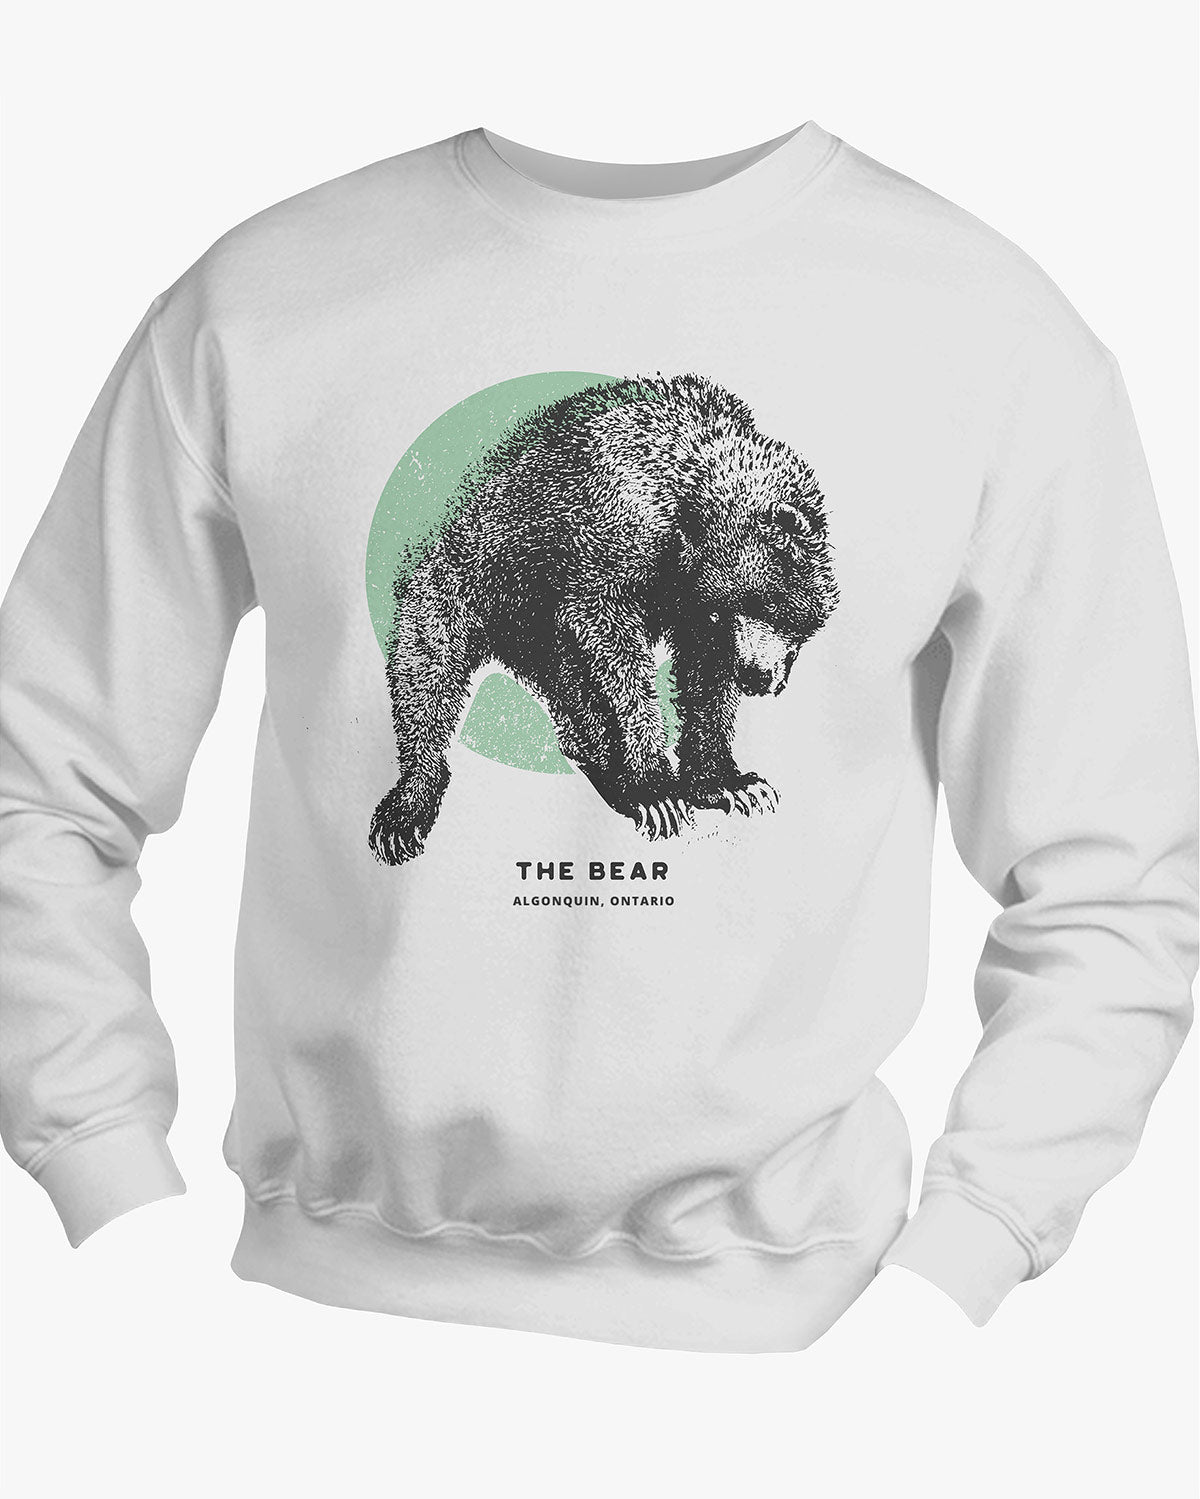 The Bear - Algonquin - Sweater